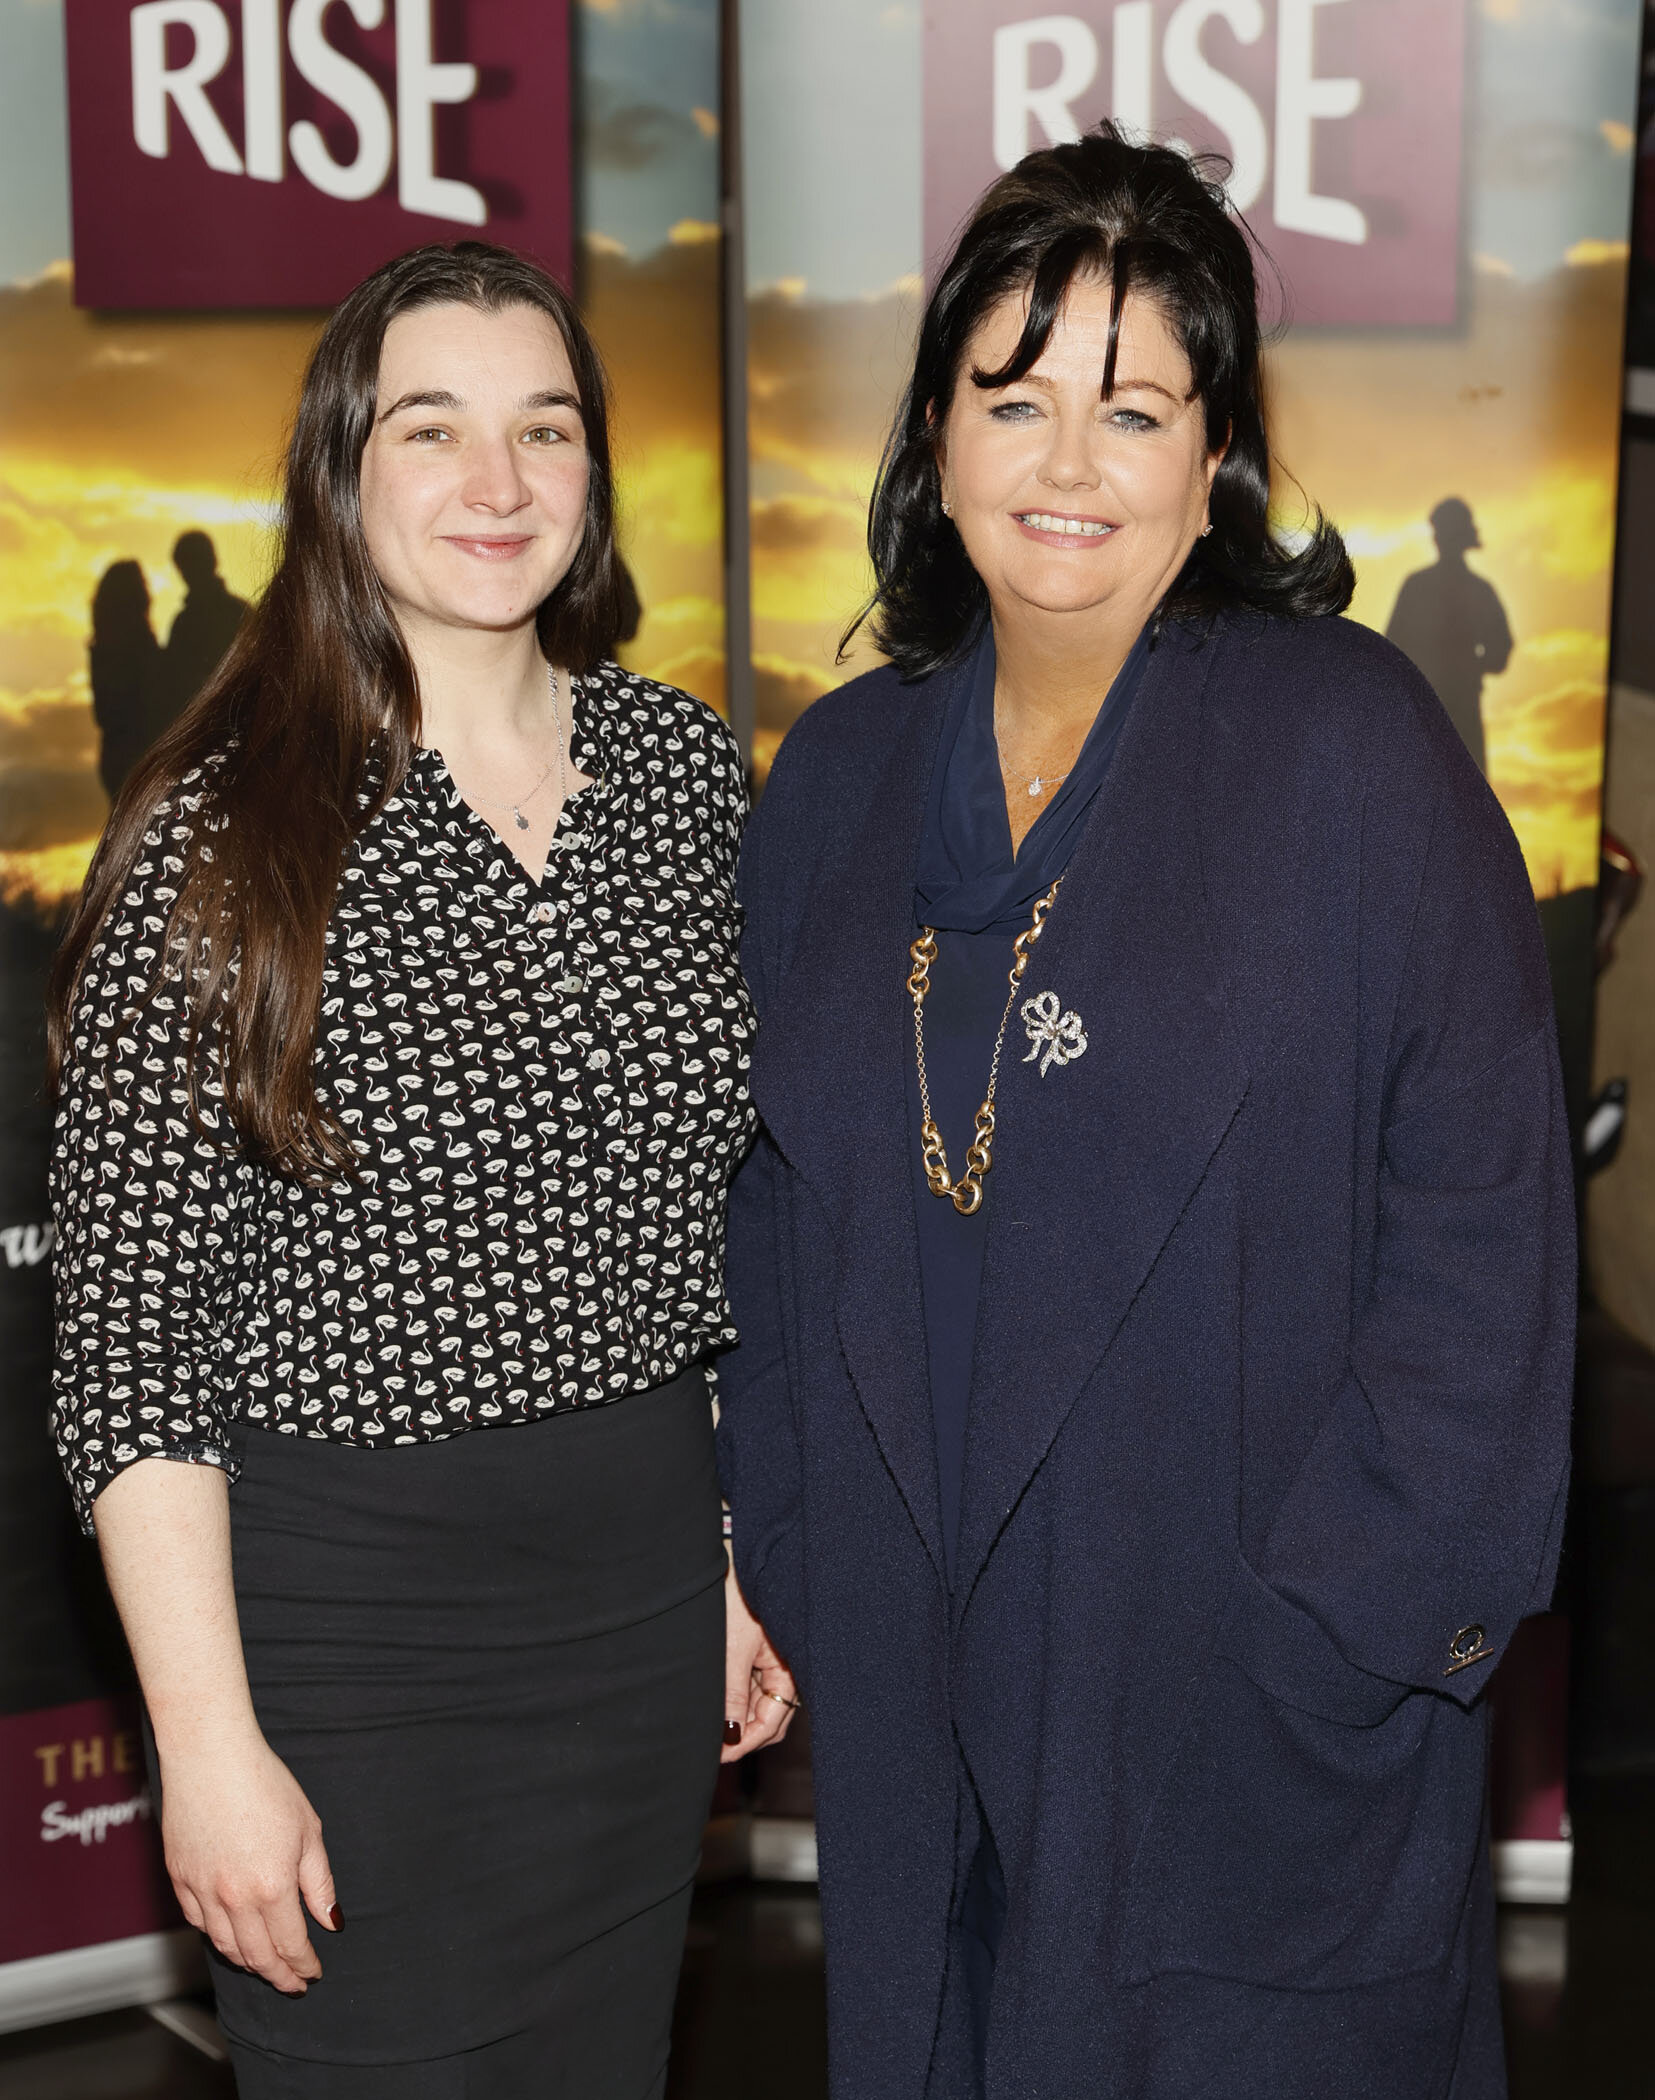 Charlotte Callaghan and Angela O'Donnell at the Friends of Rise inaugural lunch in aid of The RISE Foundation.jpg